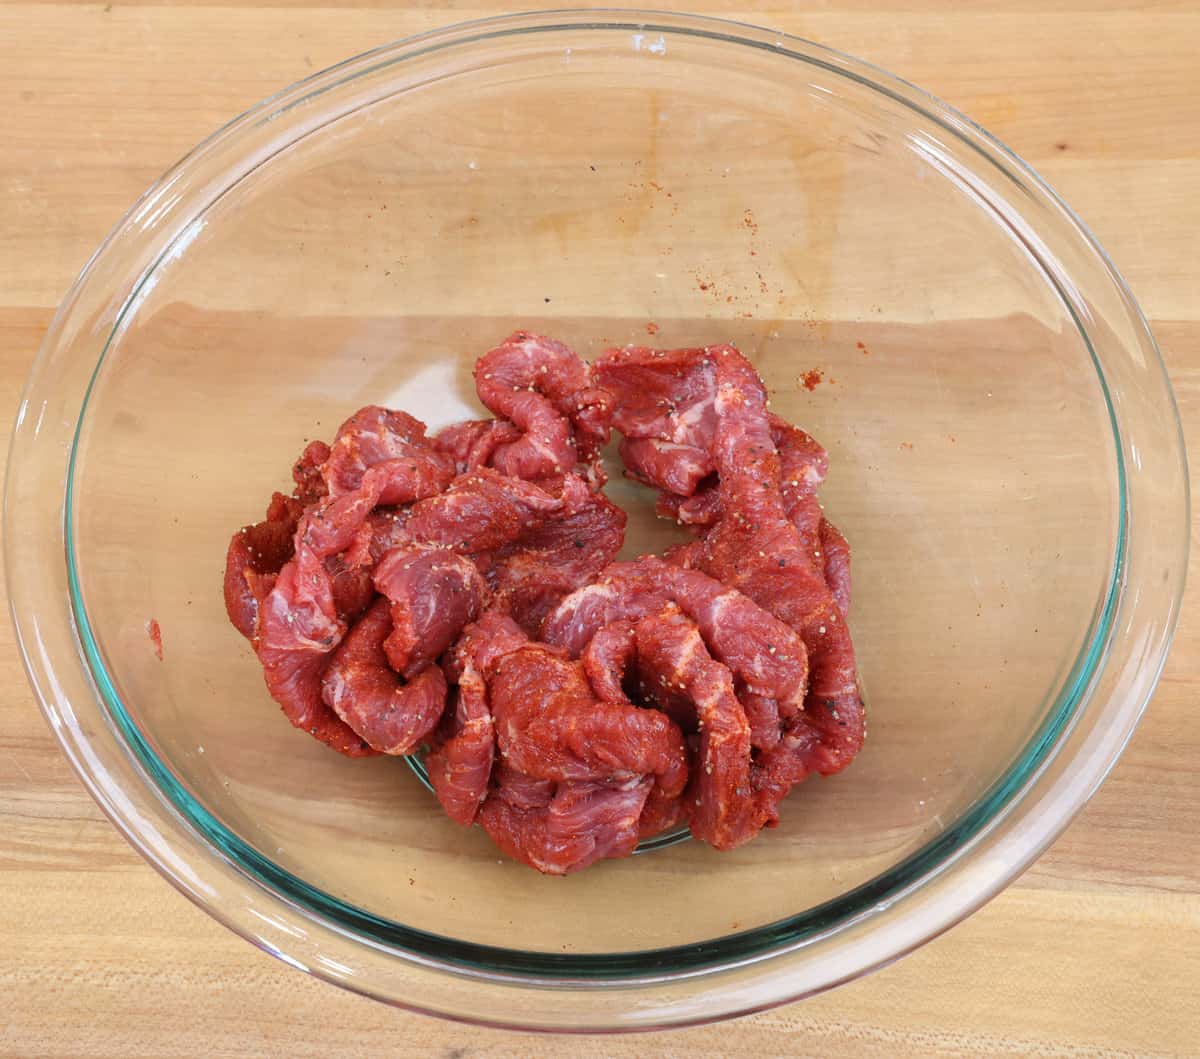 slices of flank steak seasoned with paprika, salt, and pepper in a bowl.